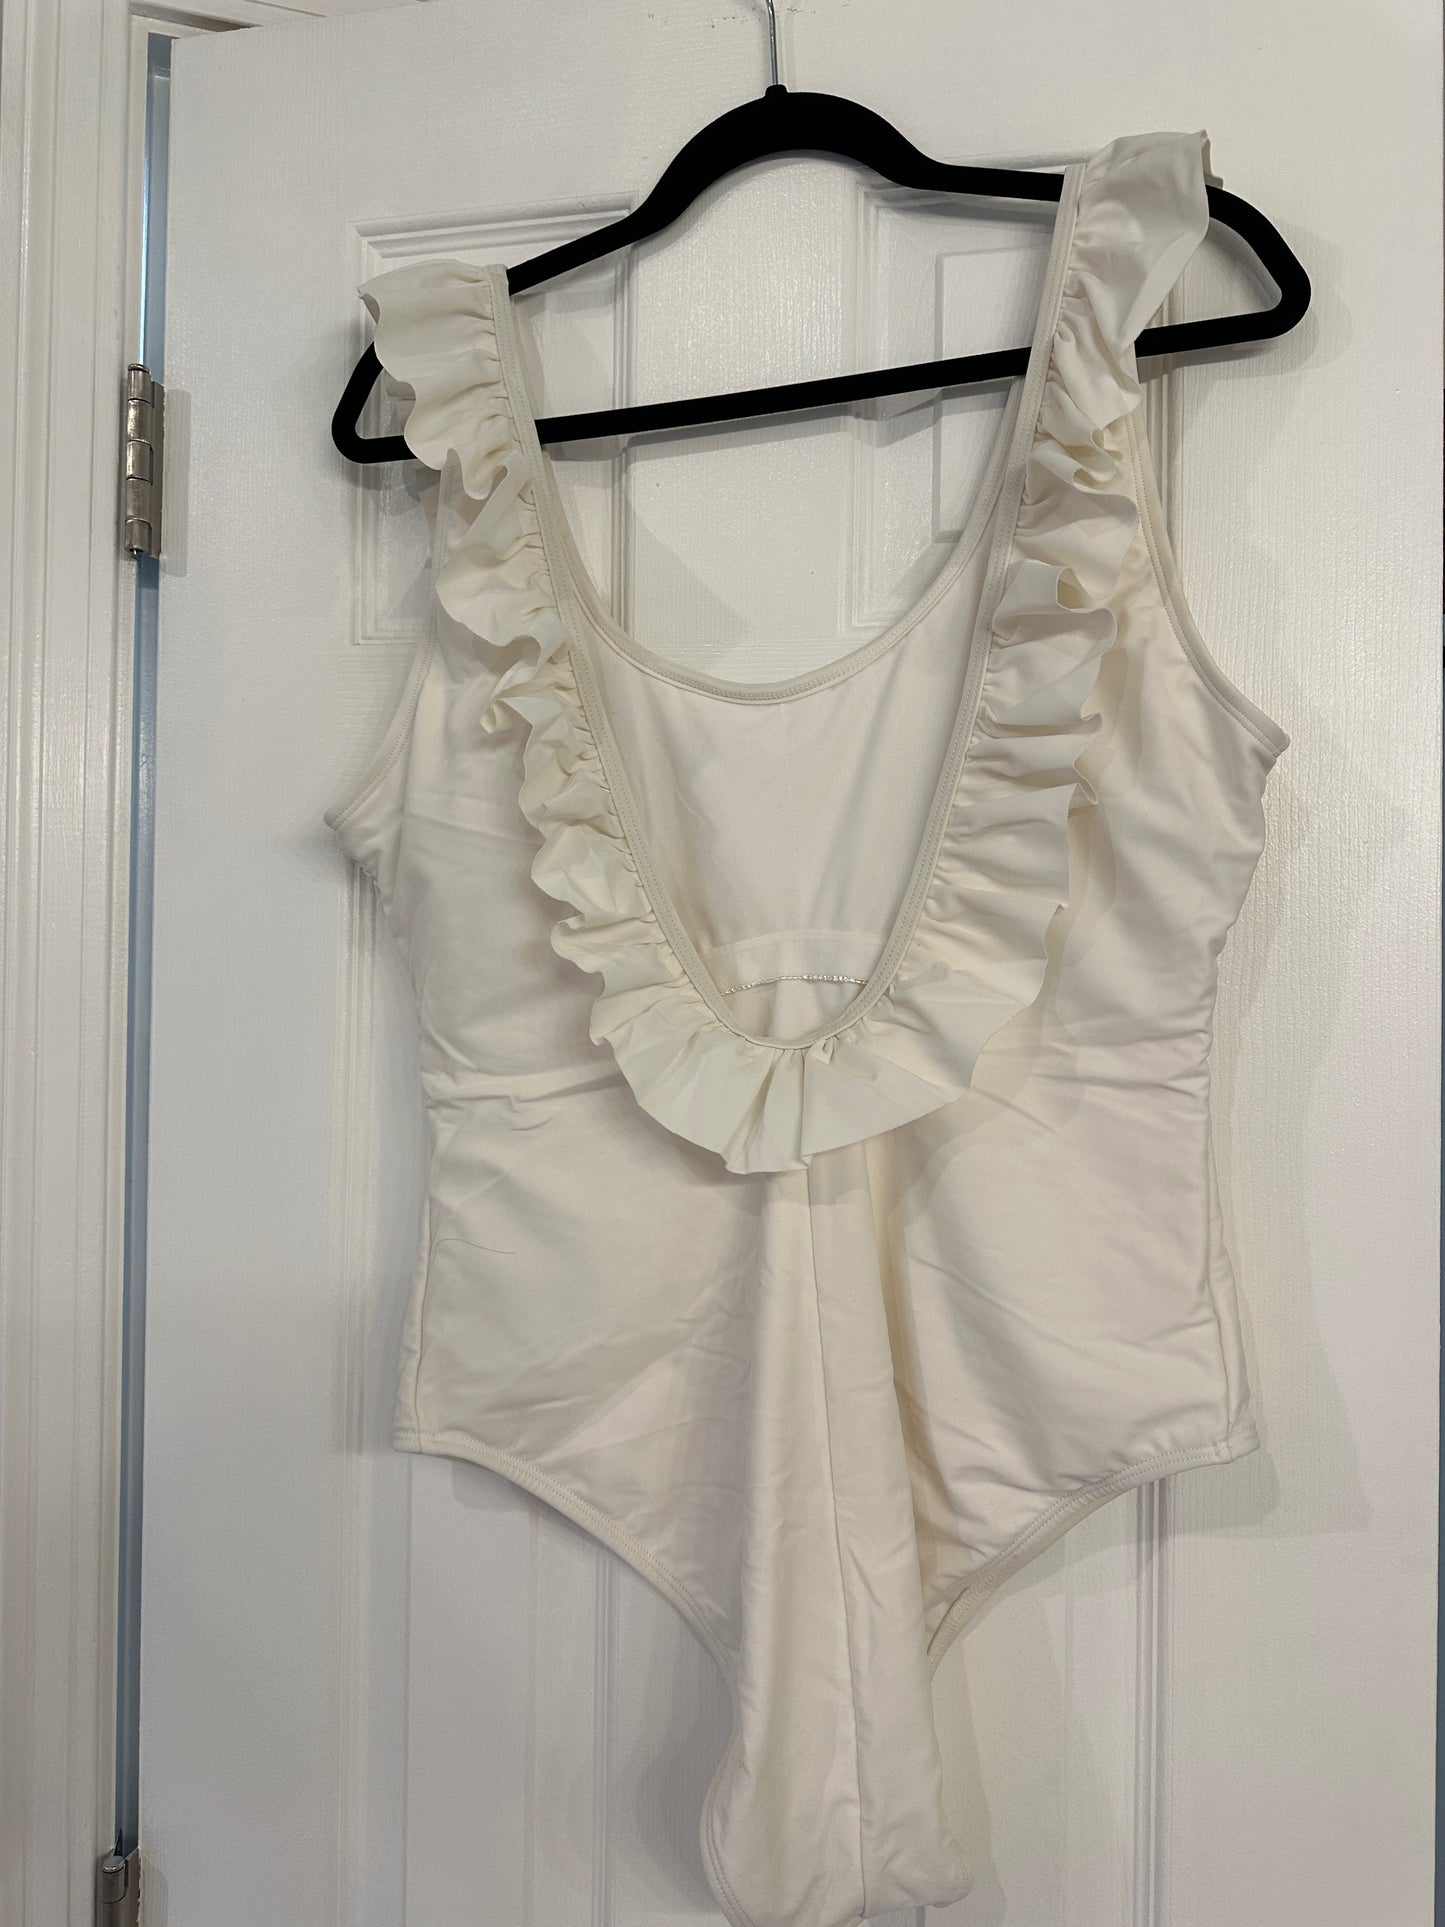 White Ruffle One Piece Swim Suit - Perfect for Bach Party or Honeymoon! Women's XL